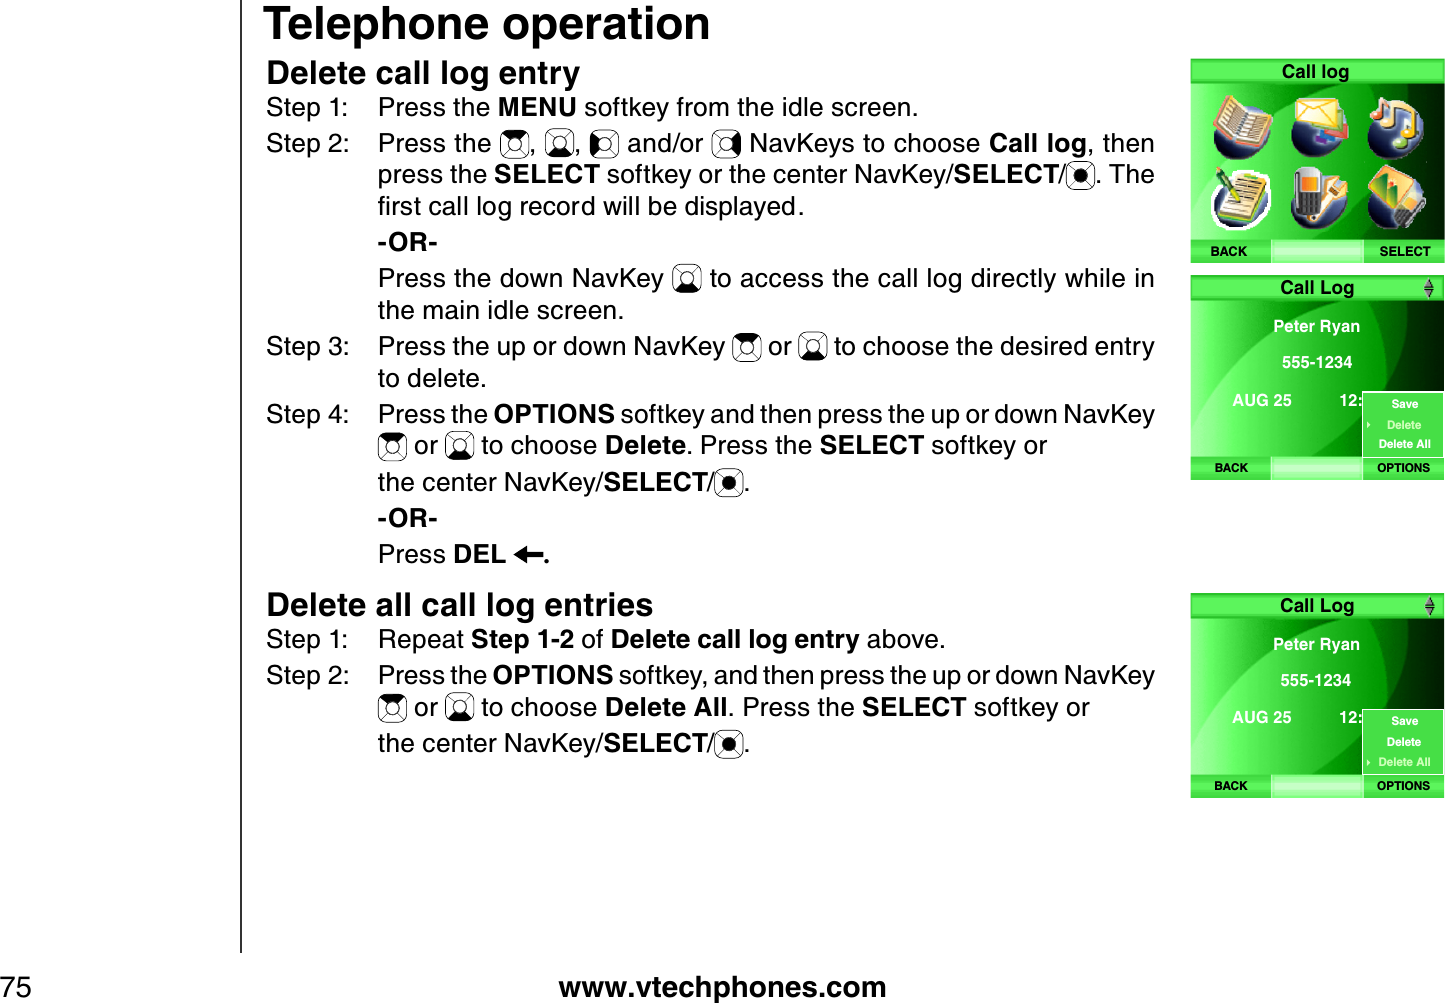 www.vtechphones.com75Delete call log entryStep 1: Press the MENU softkey from the idle screen.Step 2: Press the  , ,  and/or   NavKeys to choose Call log, then press the SELECT softkey or the center NavKey/SELECT/. The ſTUVECNNNQITGEQTFYKNNDGFKURNC[GF    -OR-    Press the down NavKey   to access the call log directly while in the main idle screen.Step 3: Press the up or down NavKey   or   to choose the desired entry to delete.Step 4: Press the OPTIONS softkey and then press the up or down NavKey  or   to choose Delete. Press the SELECT softkey or     the center NavKey/SELECT/.    -OR-    Press DEL .Delete all call log entriesStep 1: Repeat Step 1-2 of Delete call log entry above. Step 2: Press the OPTIONS softkey, and then press the up or down NavKey  or   to choose Delete All. Press the SELECT softkey or     the center NavKey/SELECT/.Telephone operationSELECTCall logBACKBACKPeter Ryan 555-1234AUG 25  12:24PM Call LogOPTIONSSaveDeleteDelete AllBACKPeter Ryan 555-1234AUG 25  12:24PM Call LogOPTIONSSaveDeleteDelete All